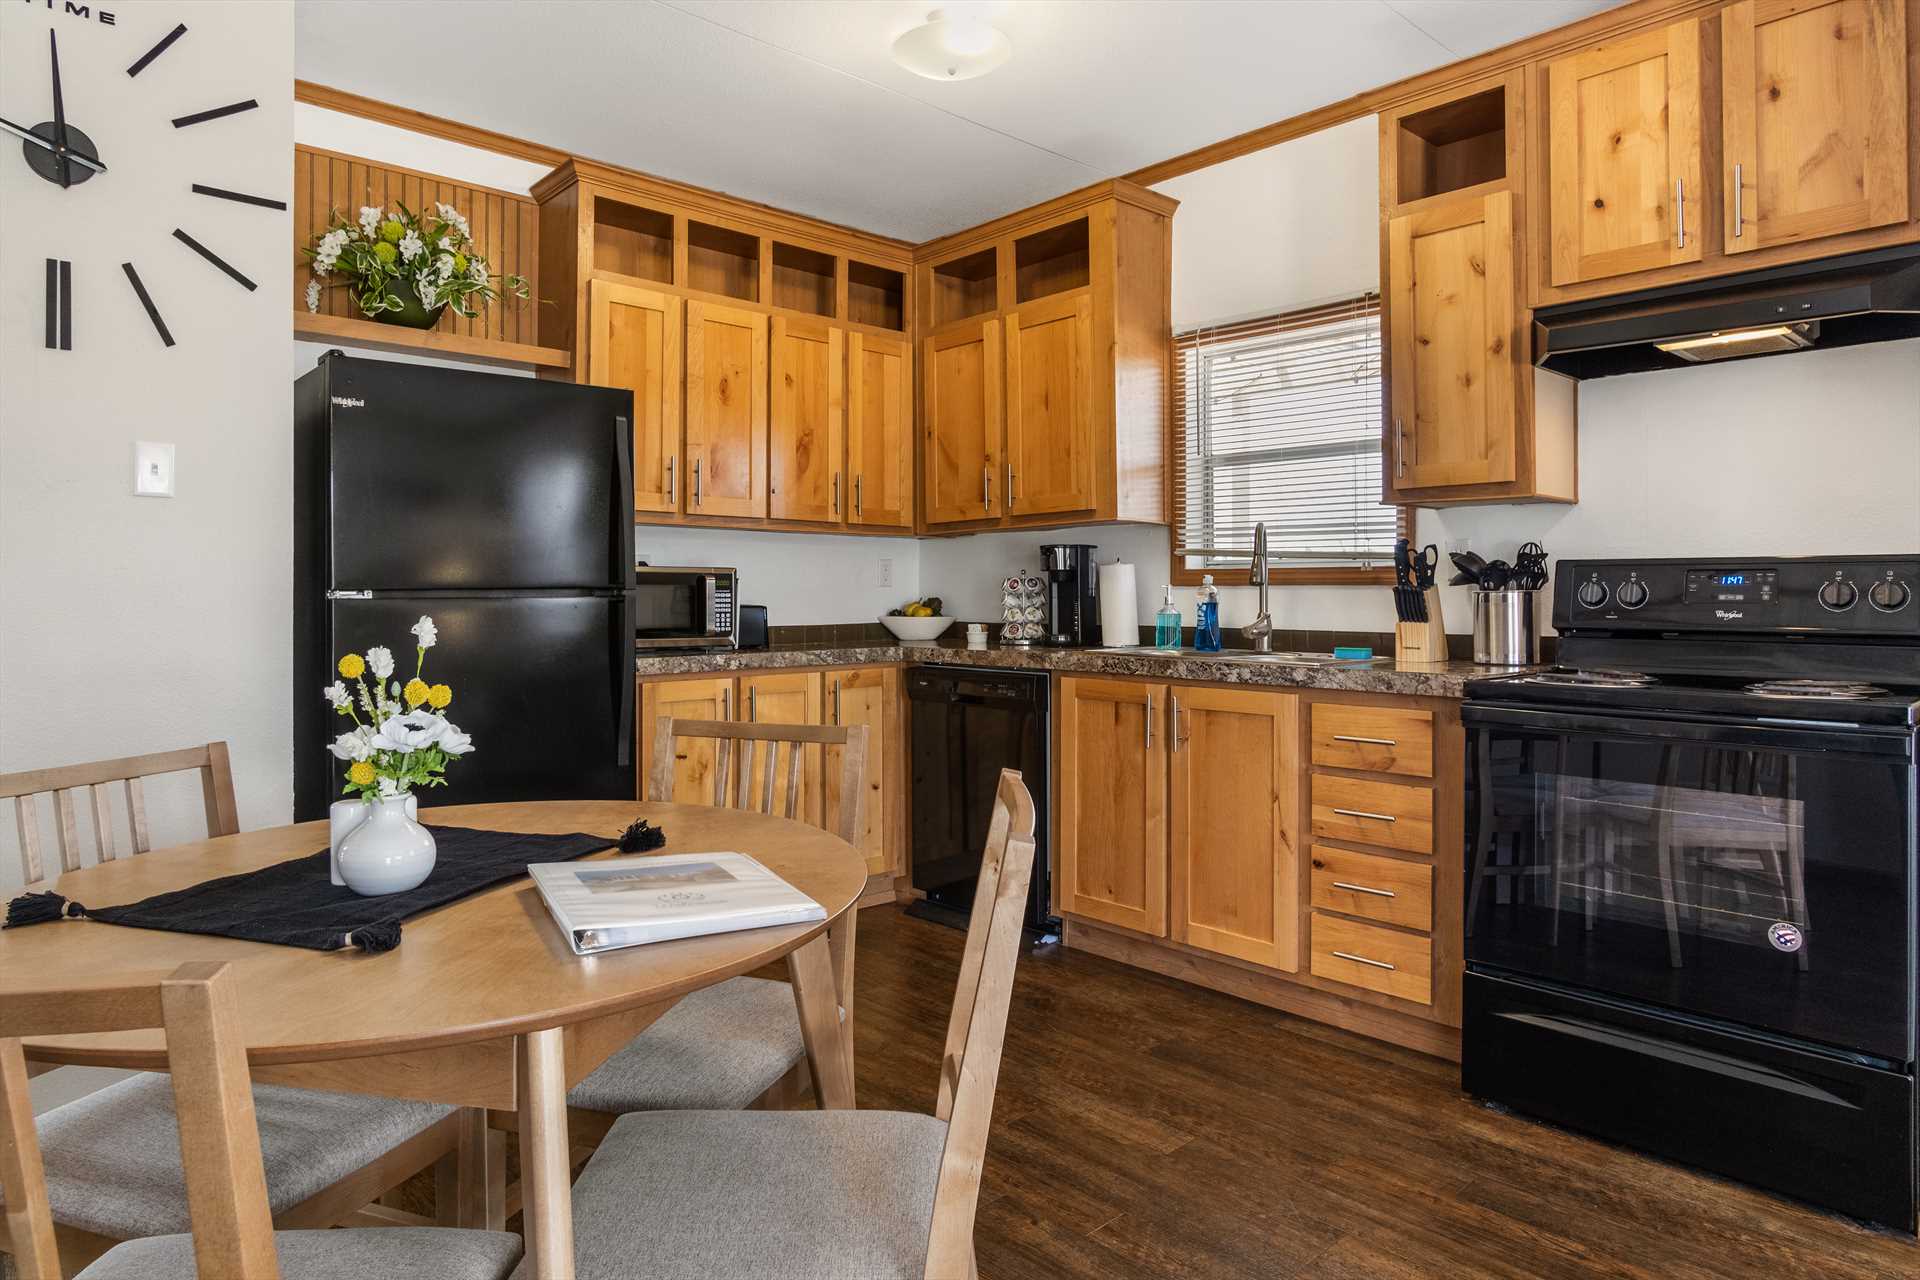                                                 The kitchen at Hill Country Memories is well-appointed, with appliances, cooking and serving ware, and even complementary coffee!